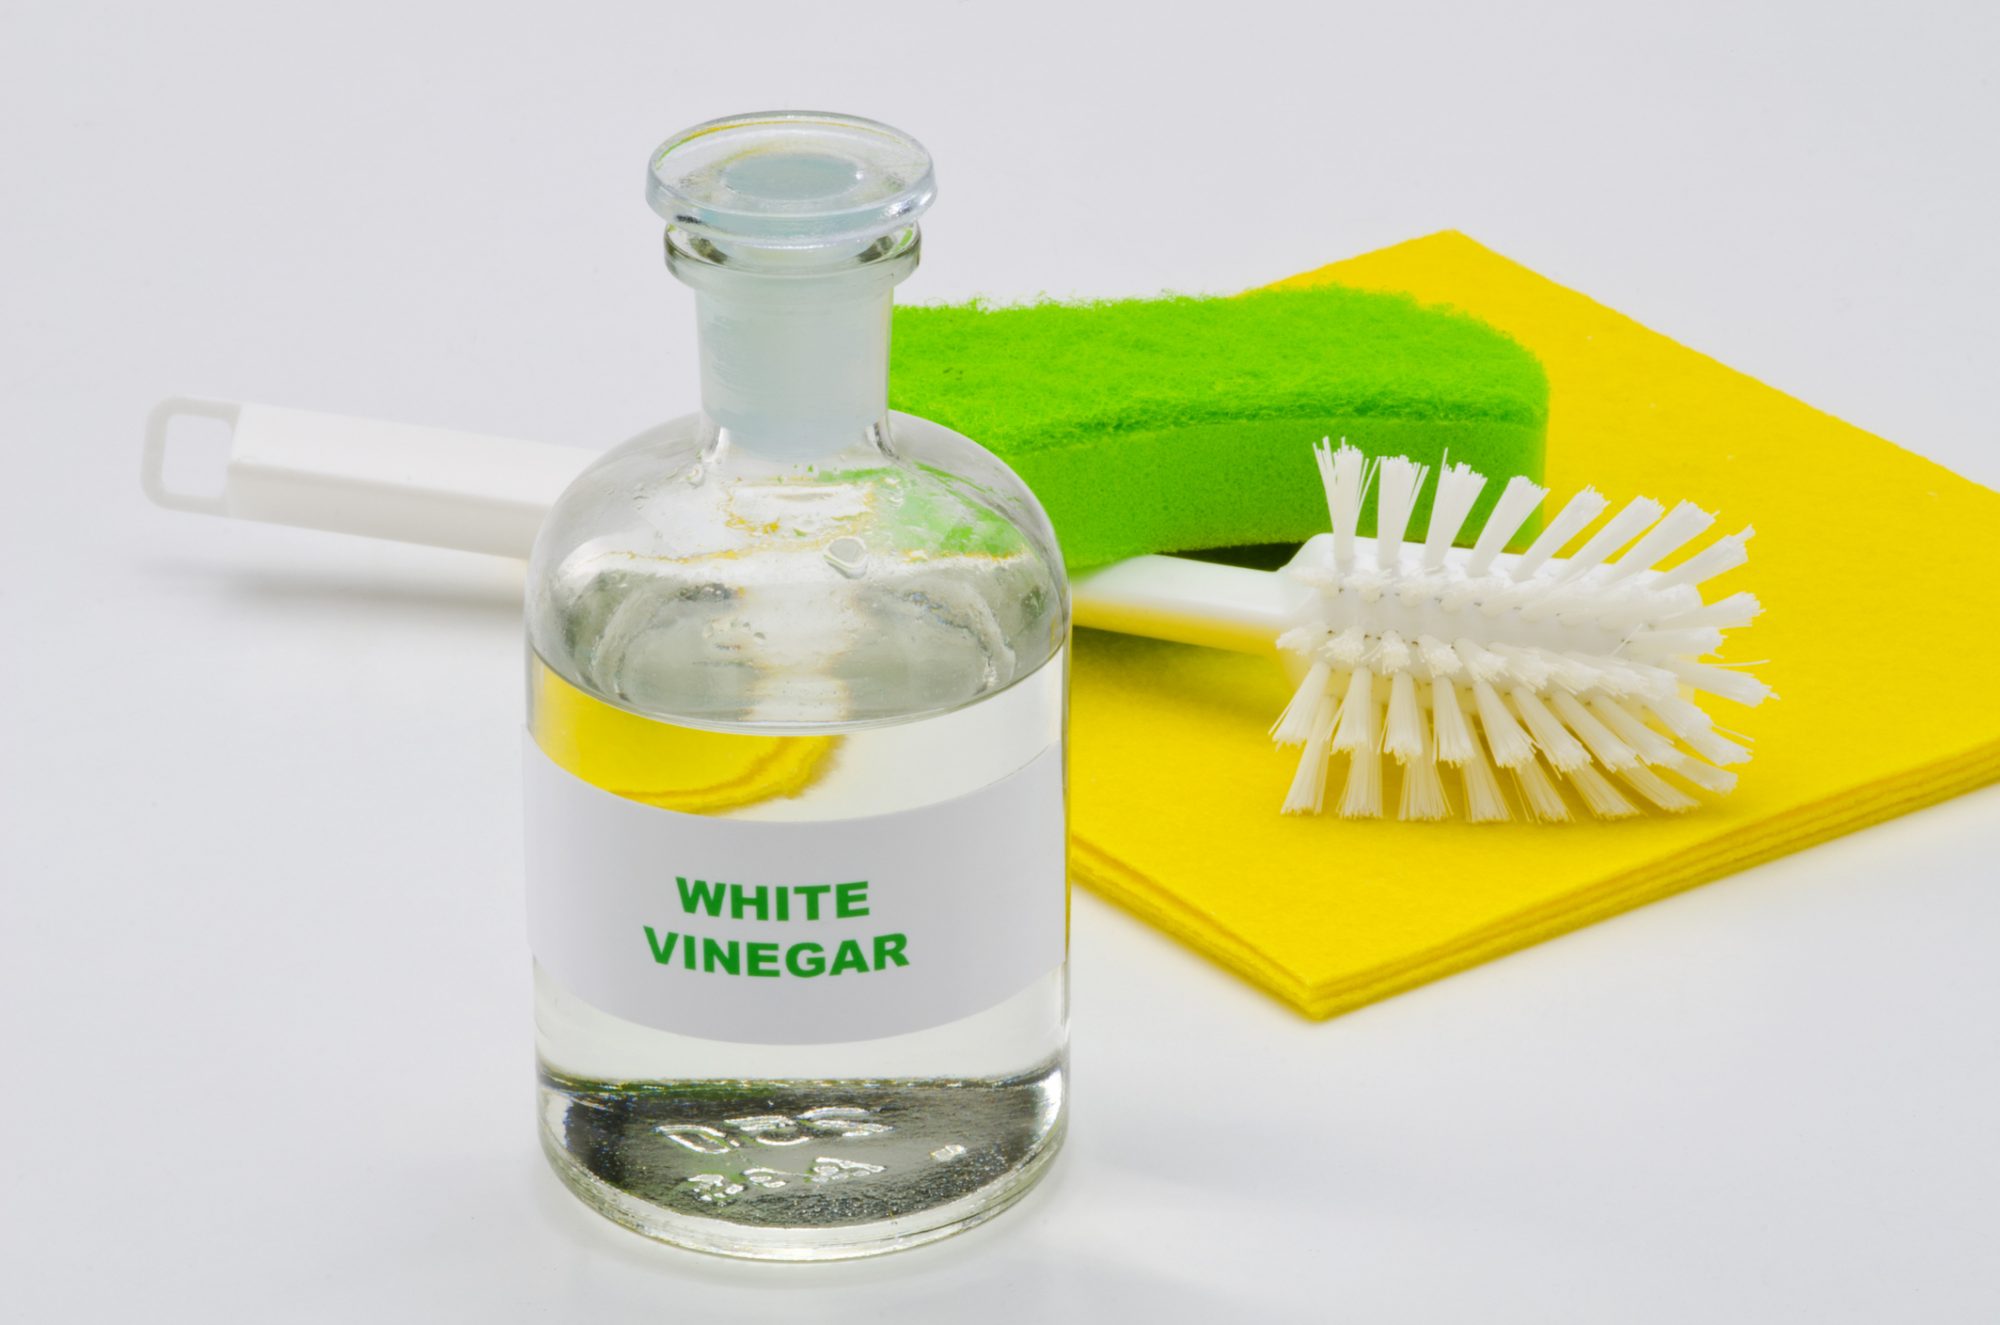 Difference Between White Vinegar and Cleaning Vinegar